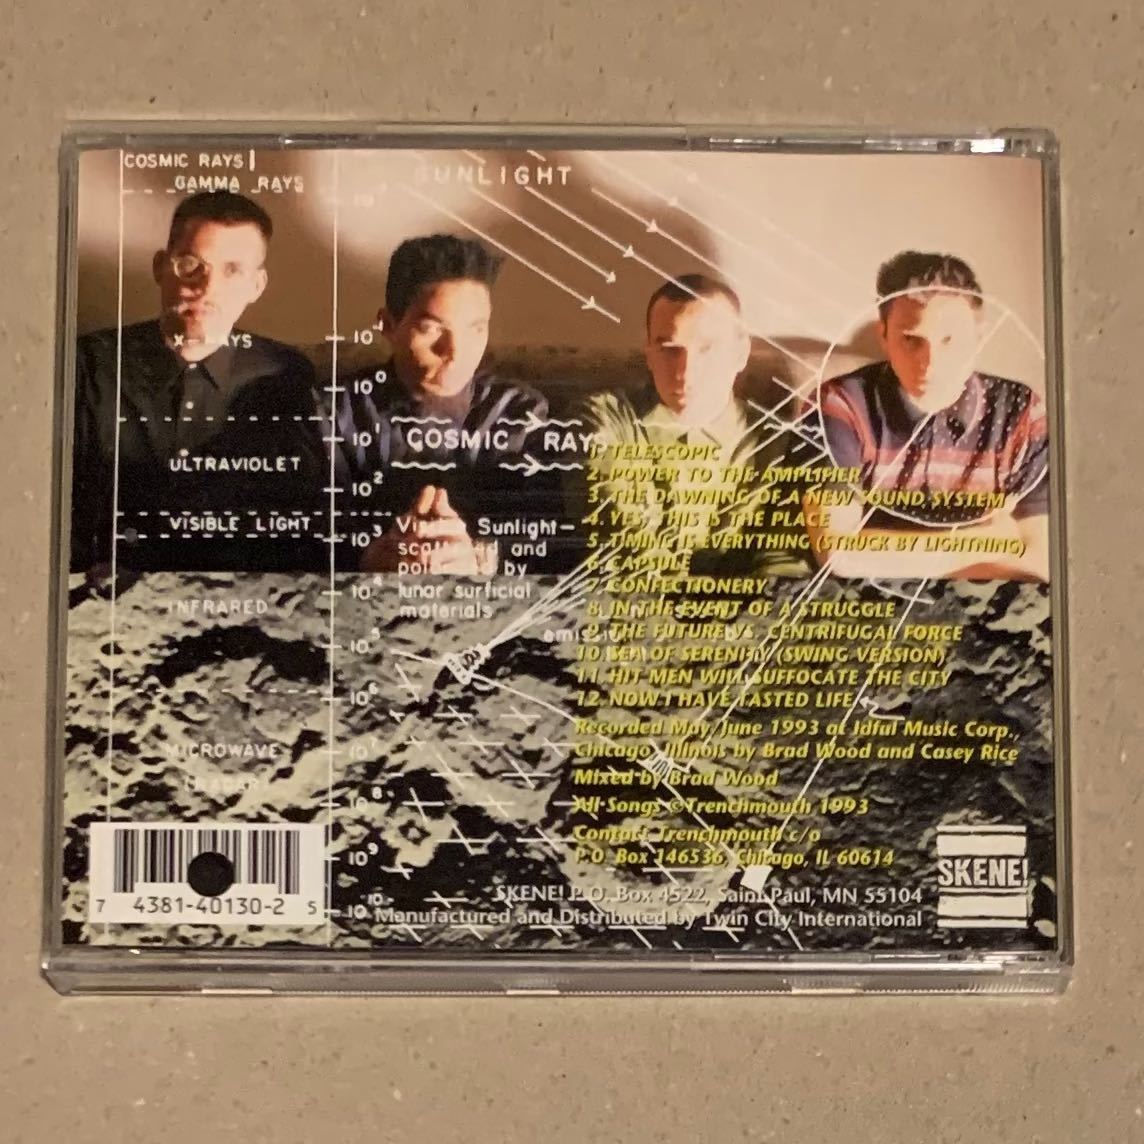 Trenchmouth Inside The Future CD 廃盤 Post Punk chicago Rock Skene! Records オルタナティブ faith no more green day US インディー_画像2